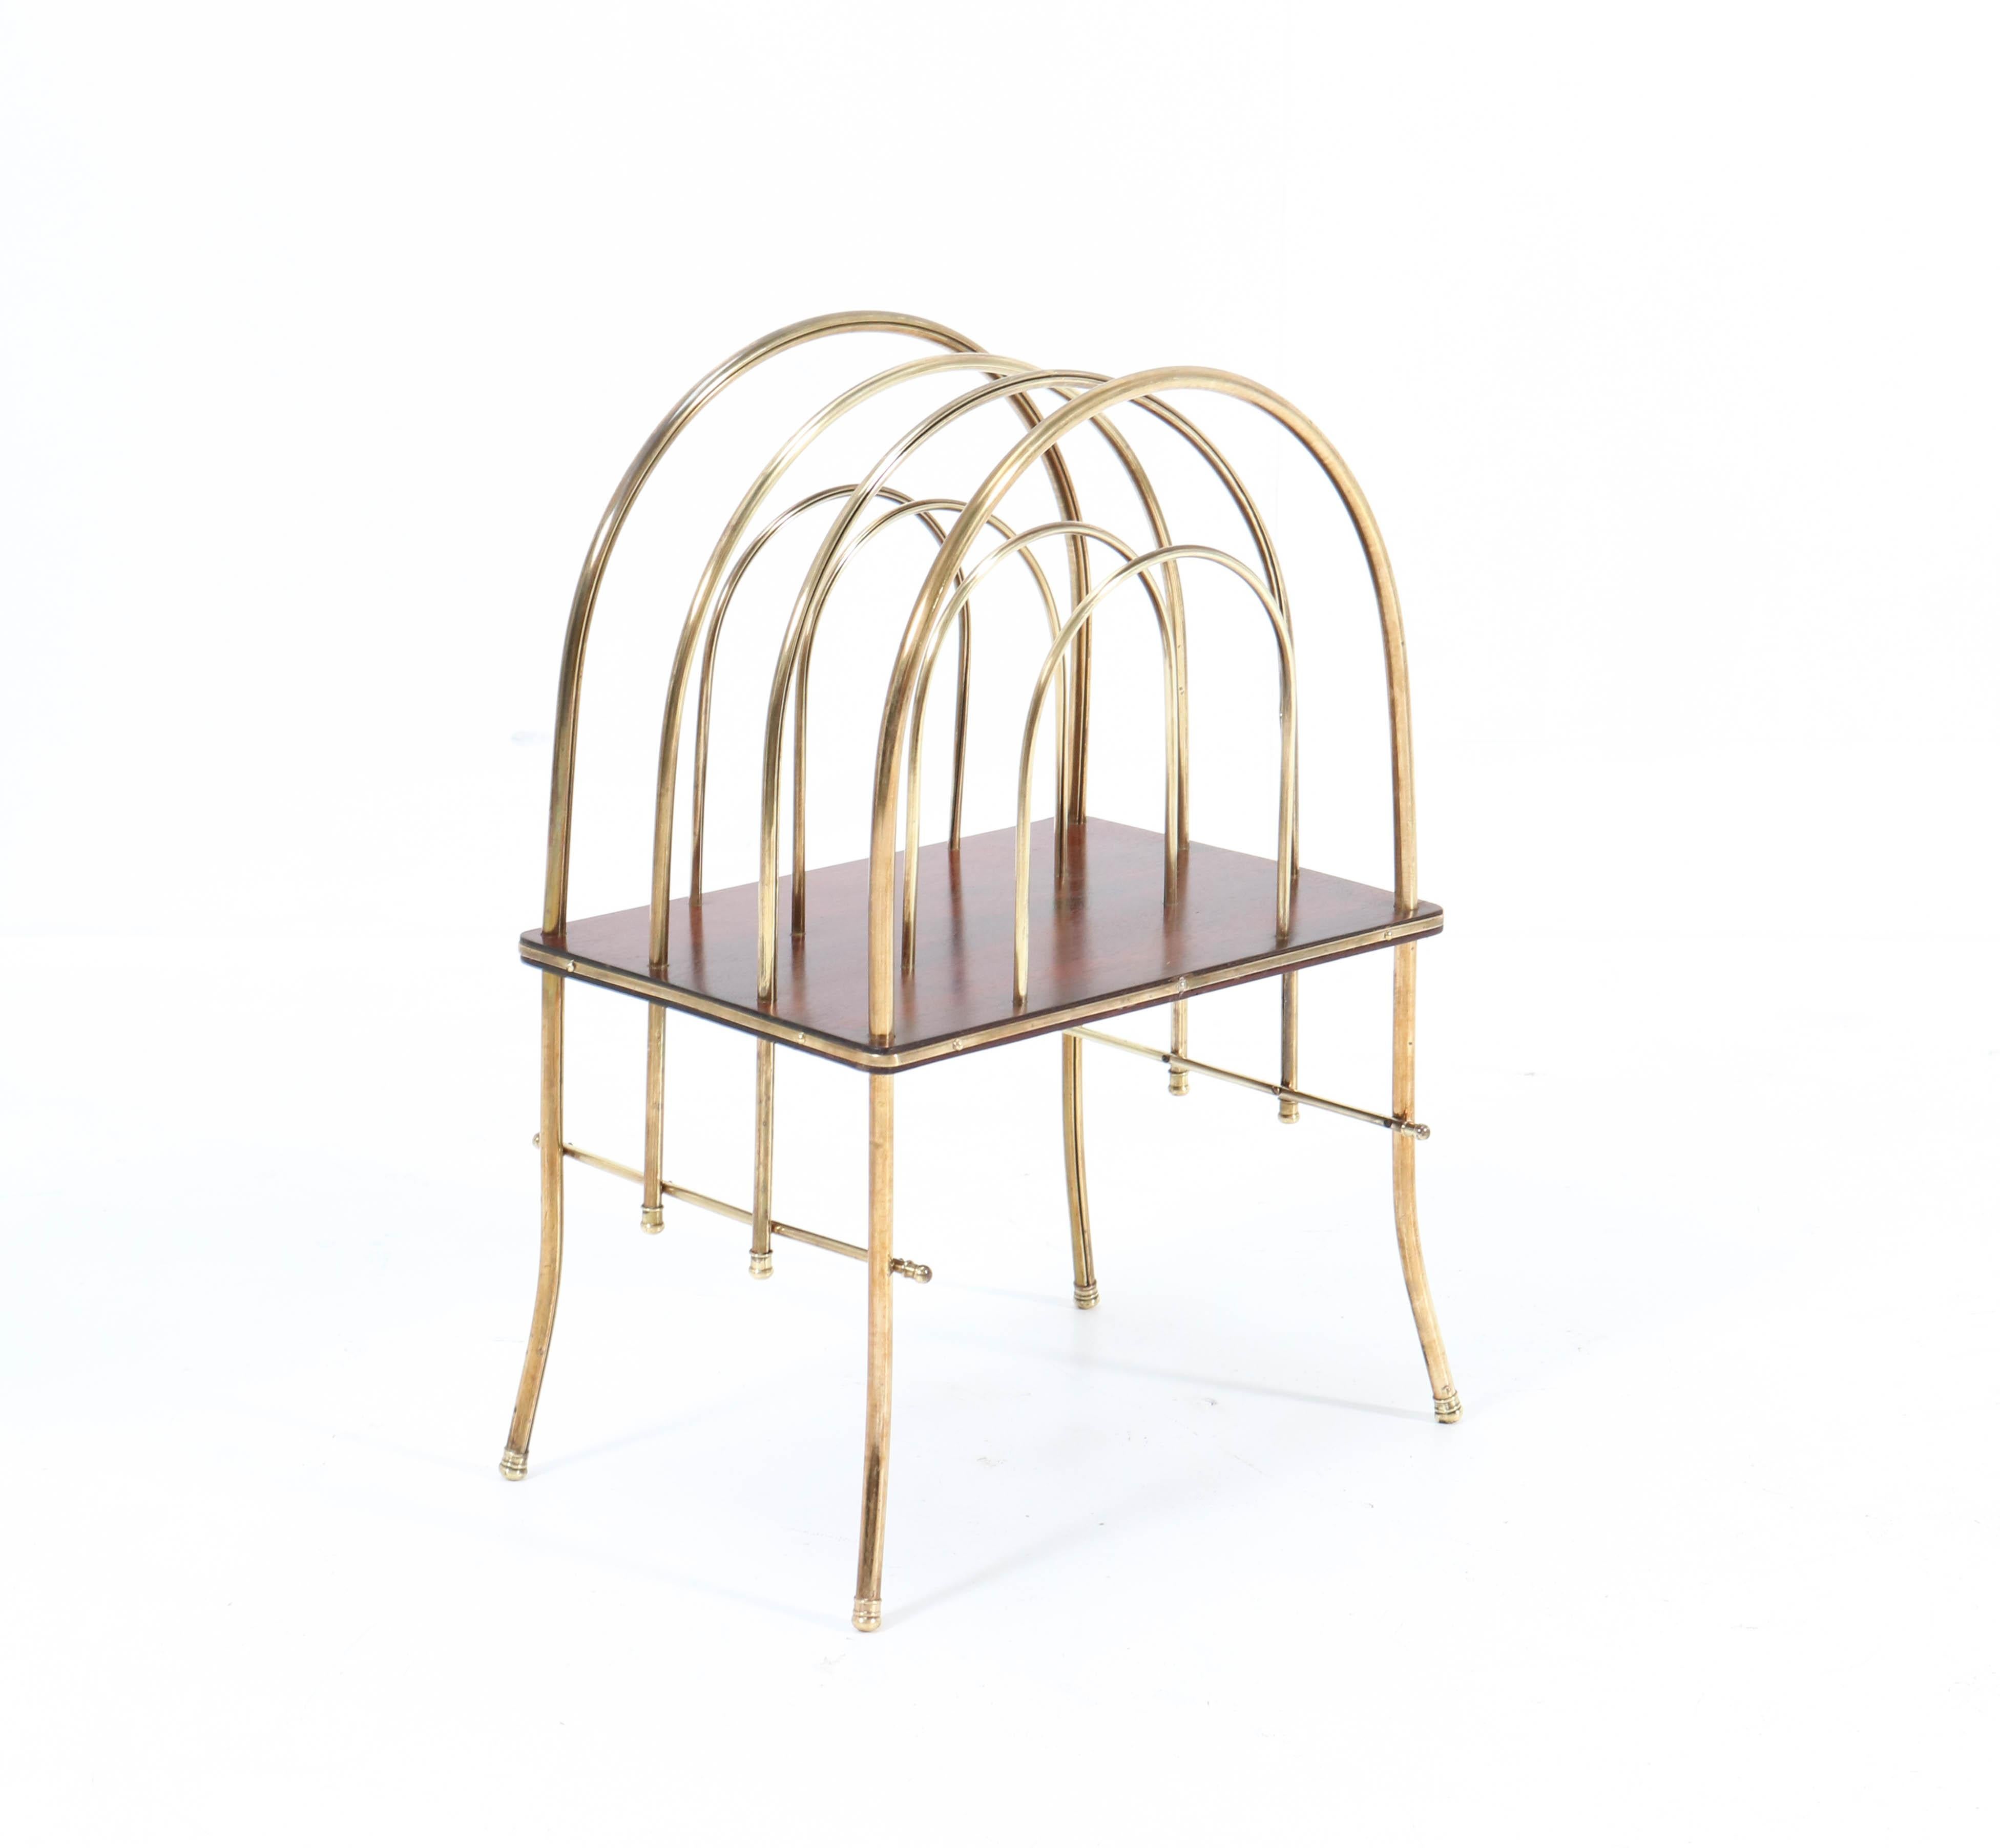 Early 20th Century French Brass and Mahogany Art Nouveau Magazine Rack, 1900s For Sale